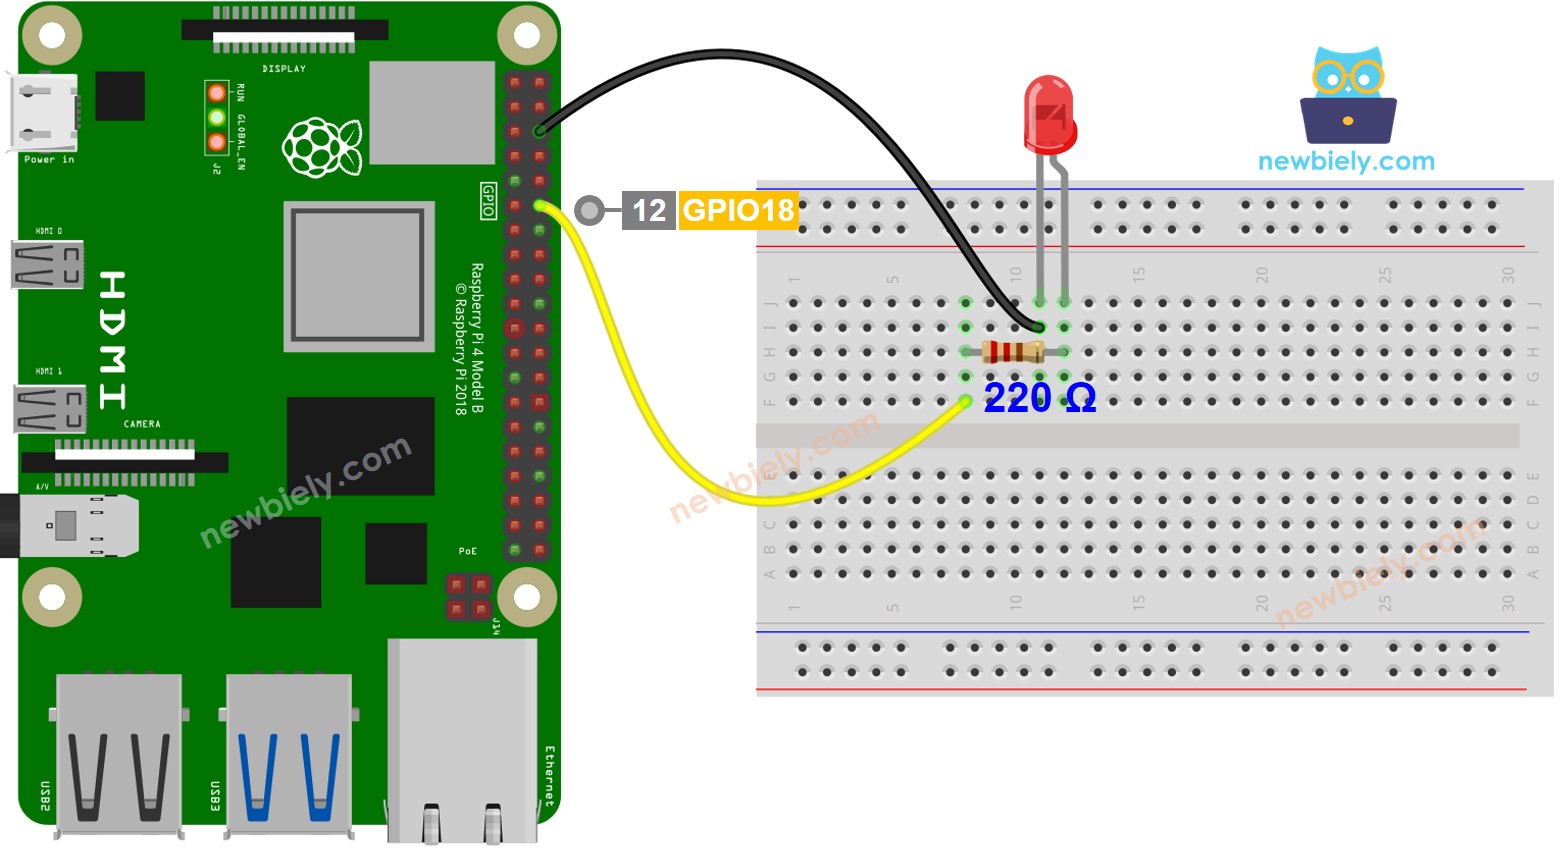 The wiring diagram between Raspberry Pi and LED